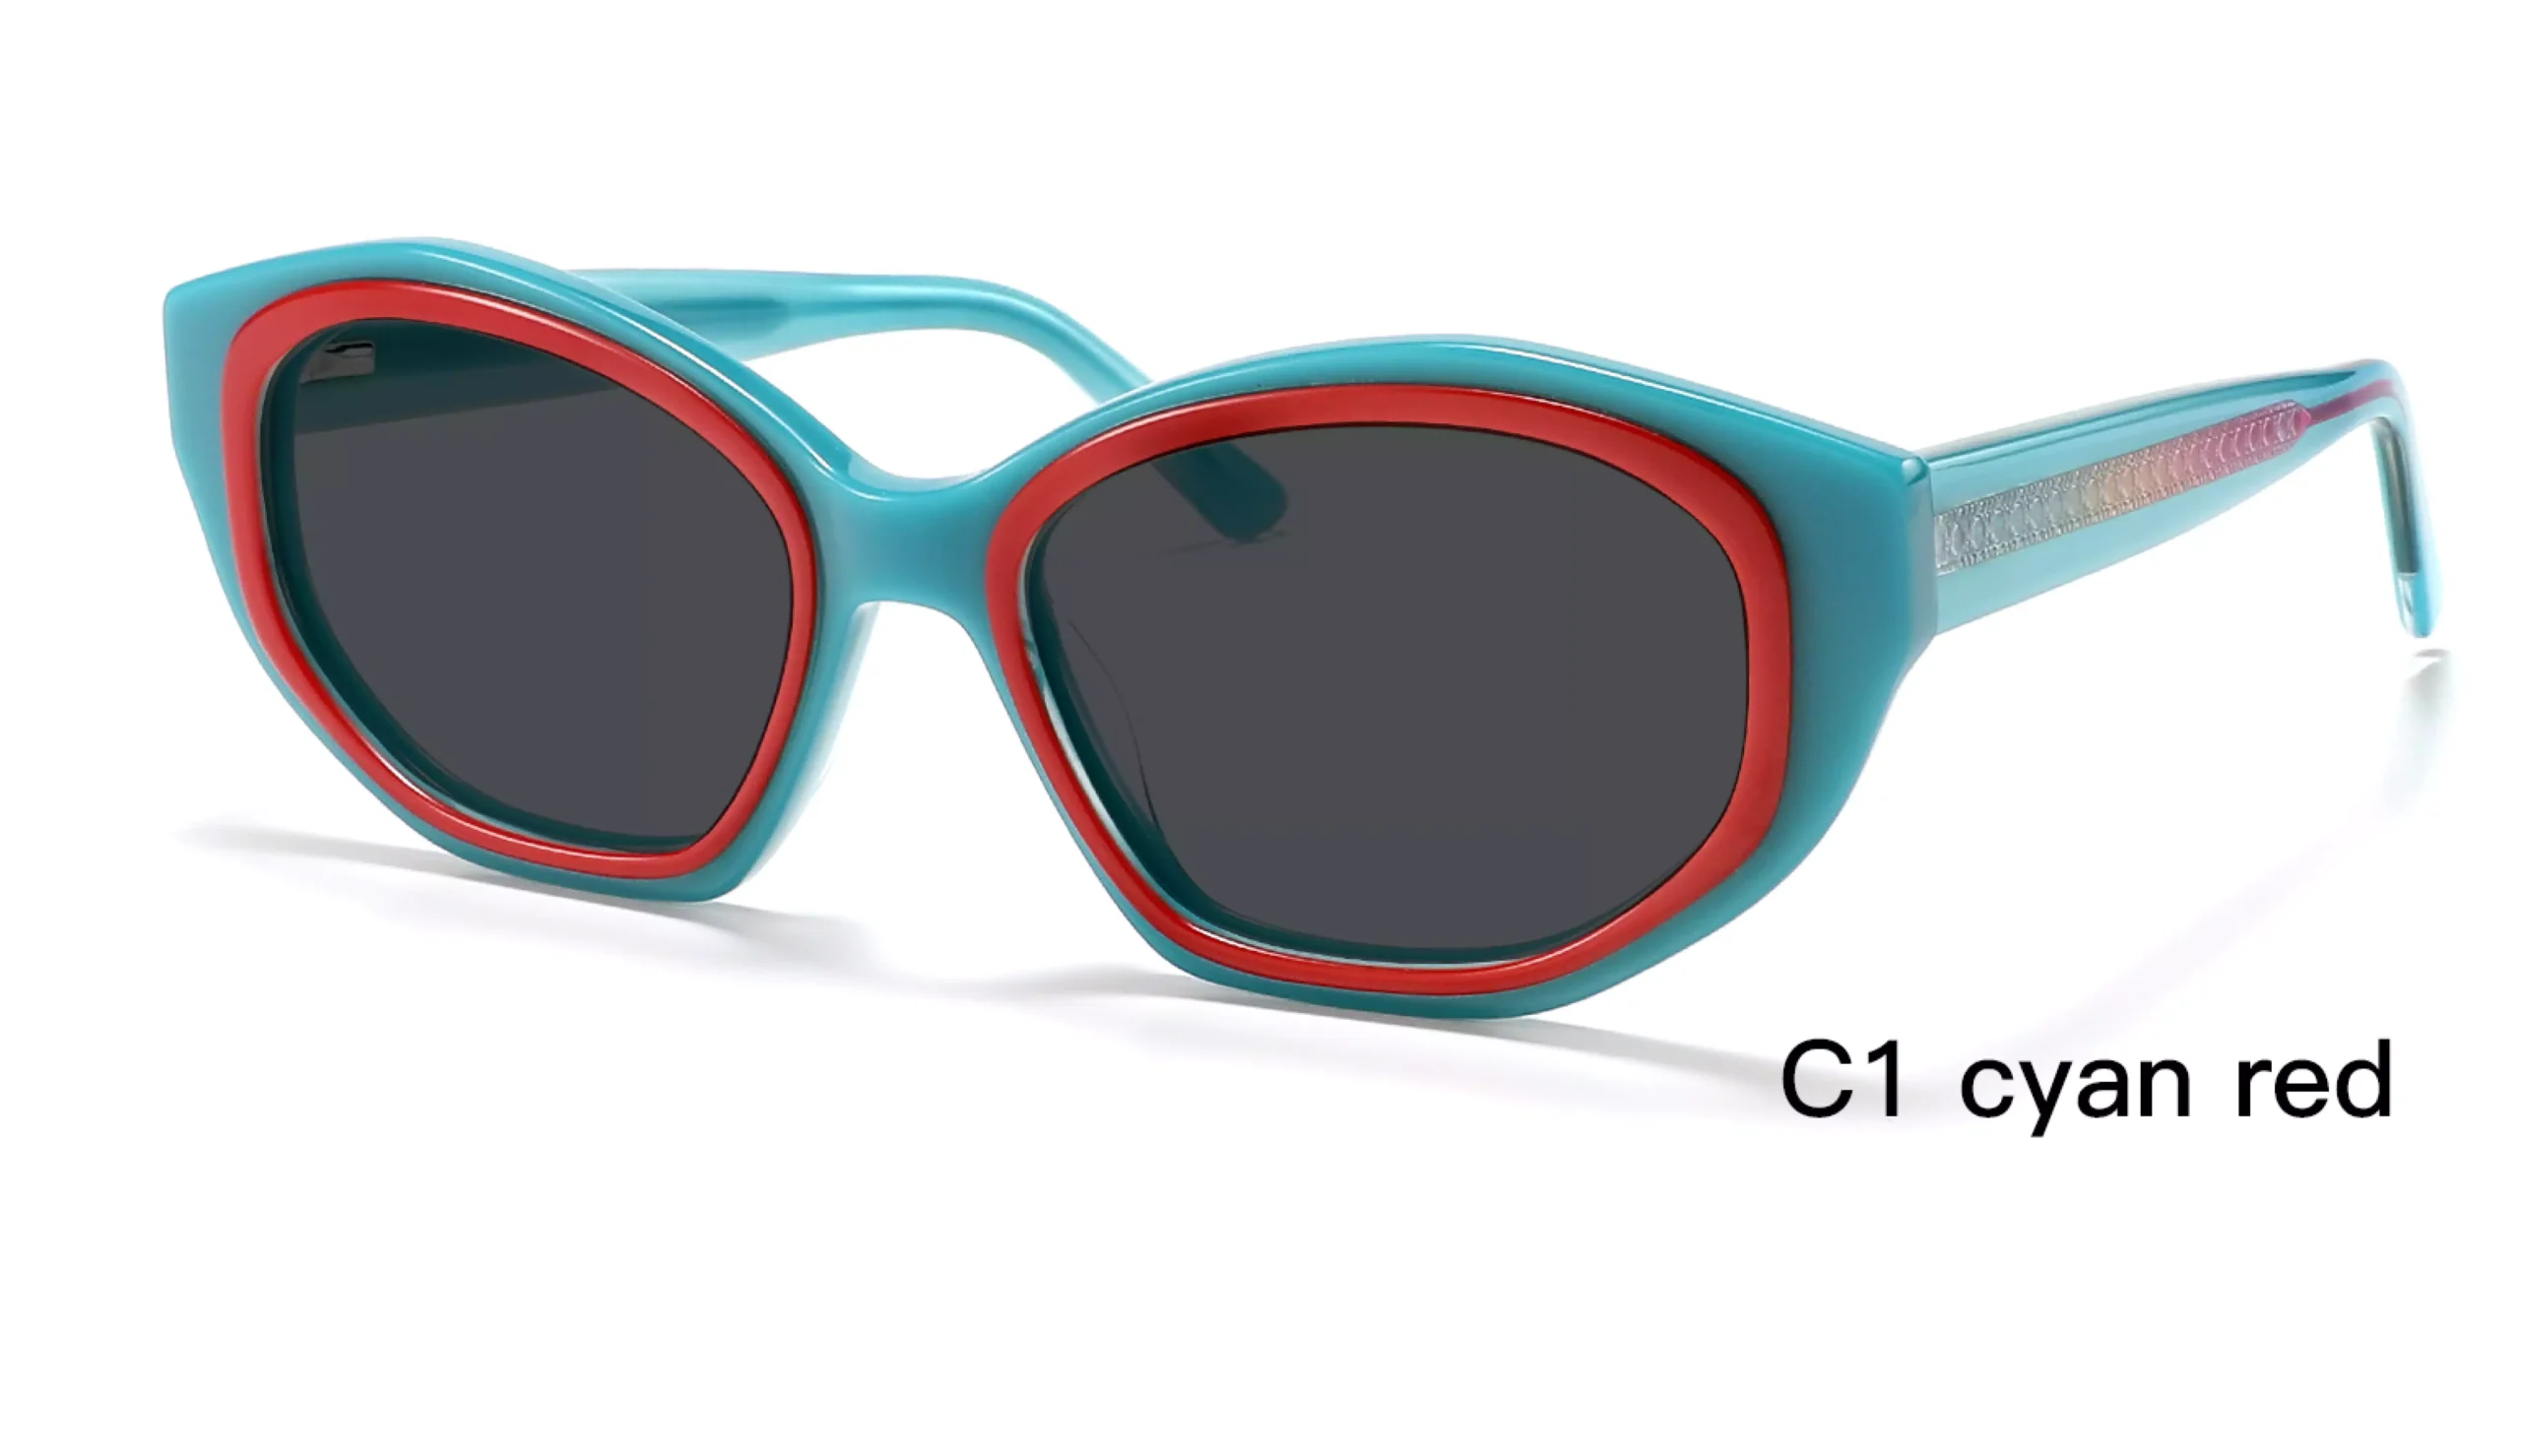 geometric, gradient temple, sunglasses, acetate, cyan red, 45 degree display, wholesale from China